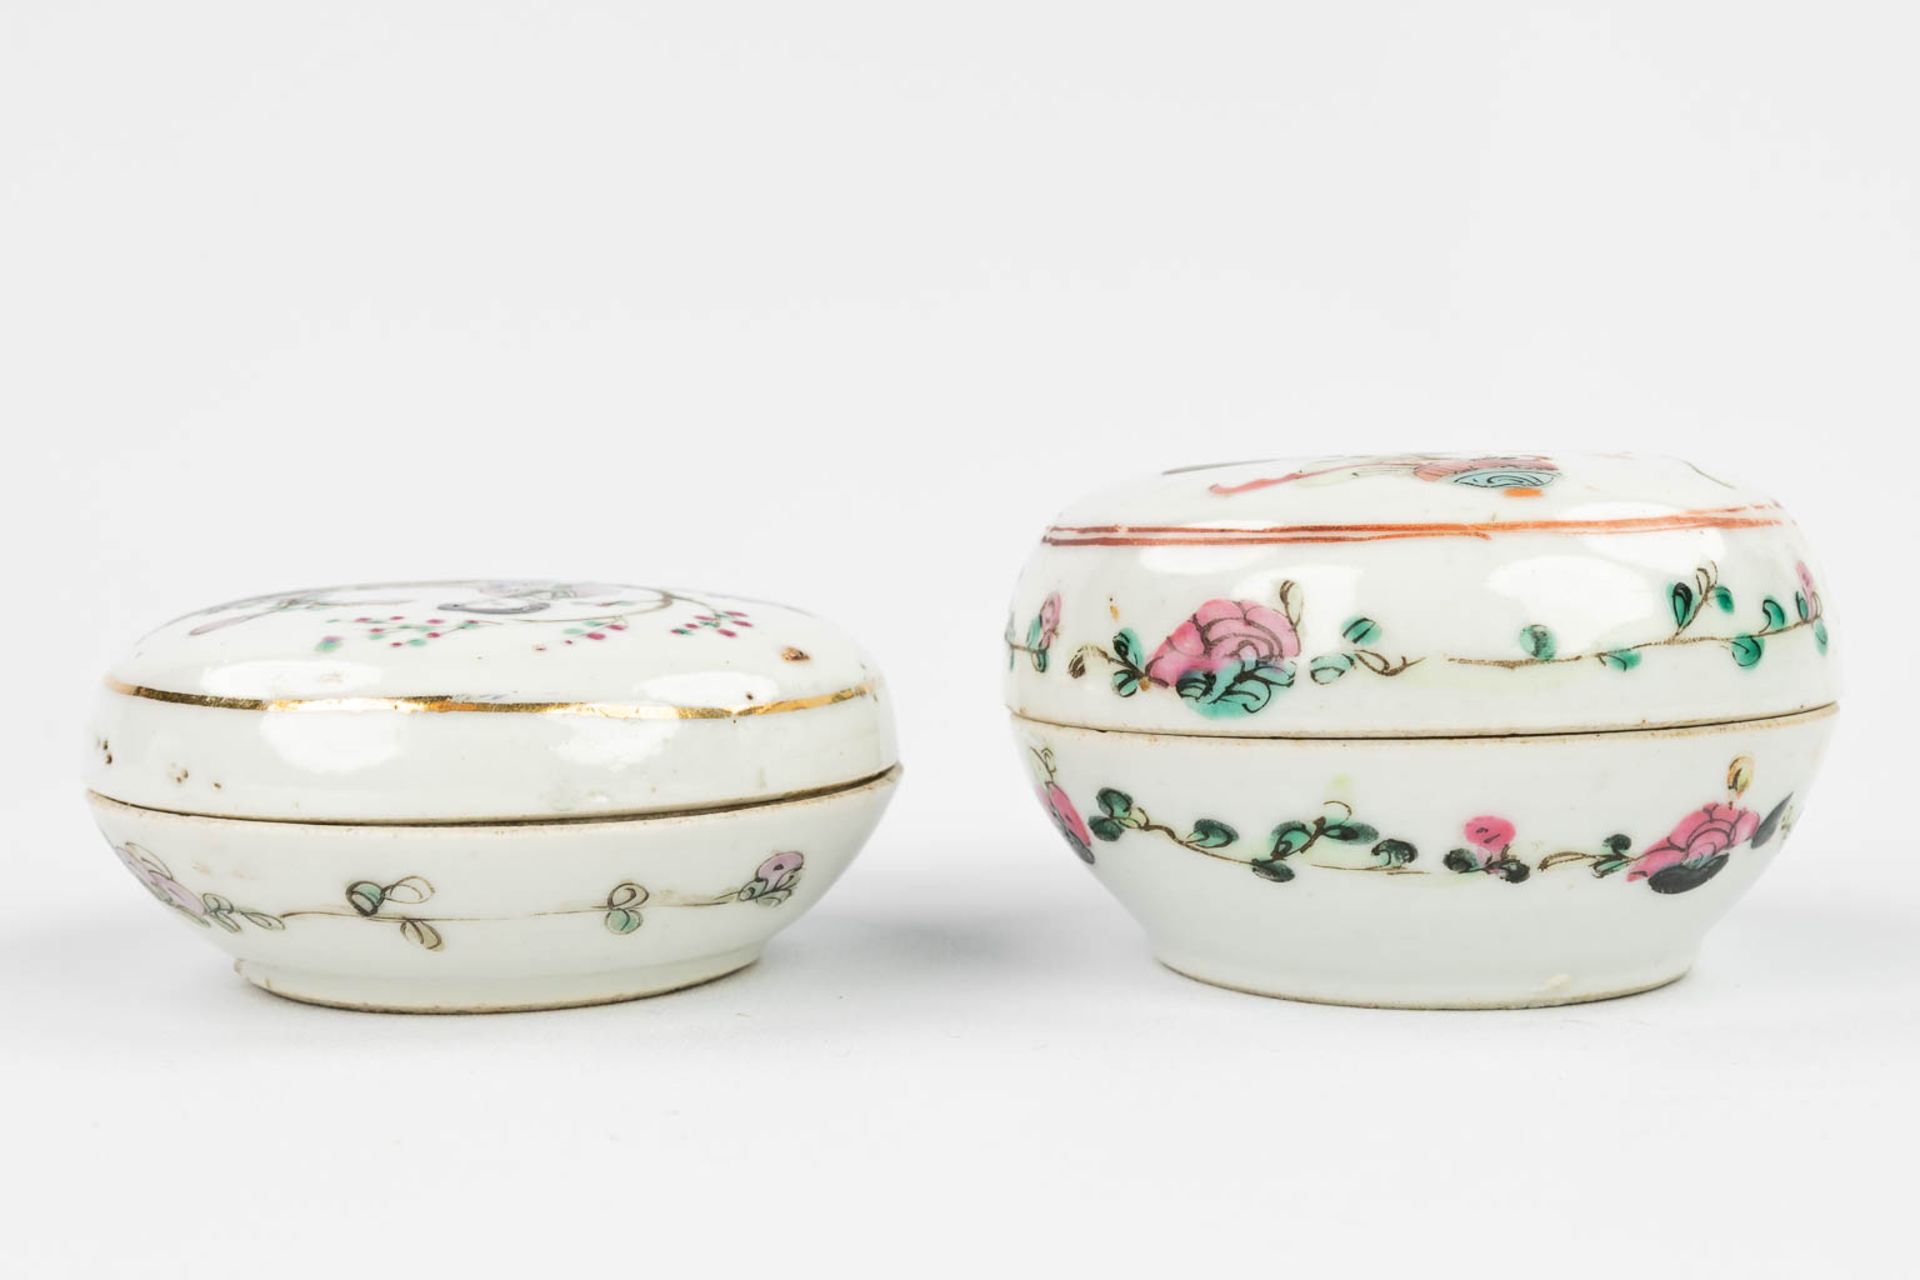 AÊset of 2 Chinese pots with lid, with hand-painted decor and made of porcelain (5 x 8,5 cm) - Image 8 of 18